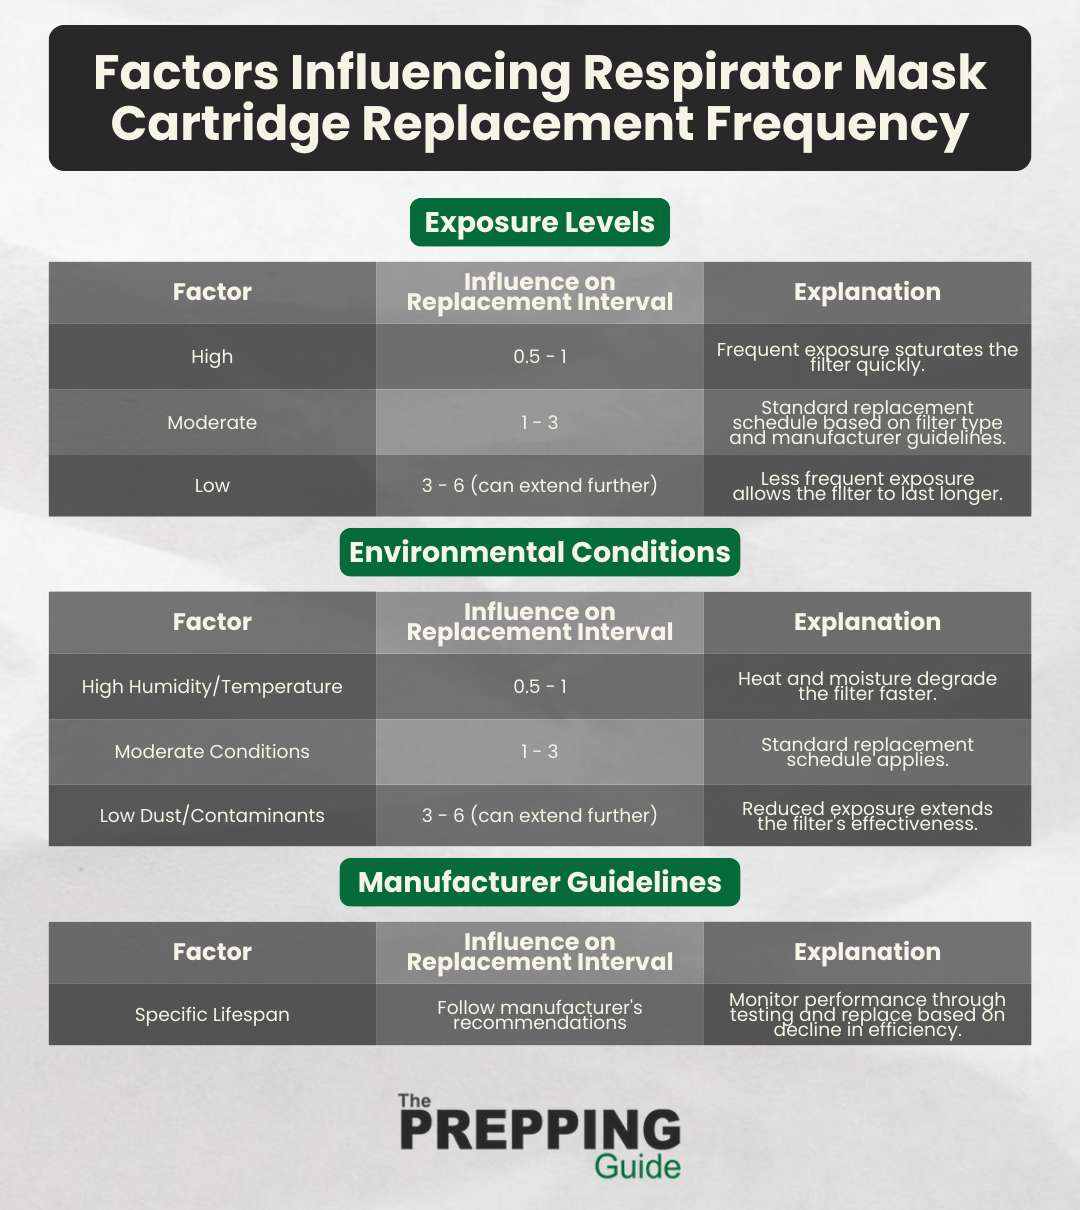 The factors influencing respirator mask cartridge replacement frequency.